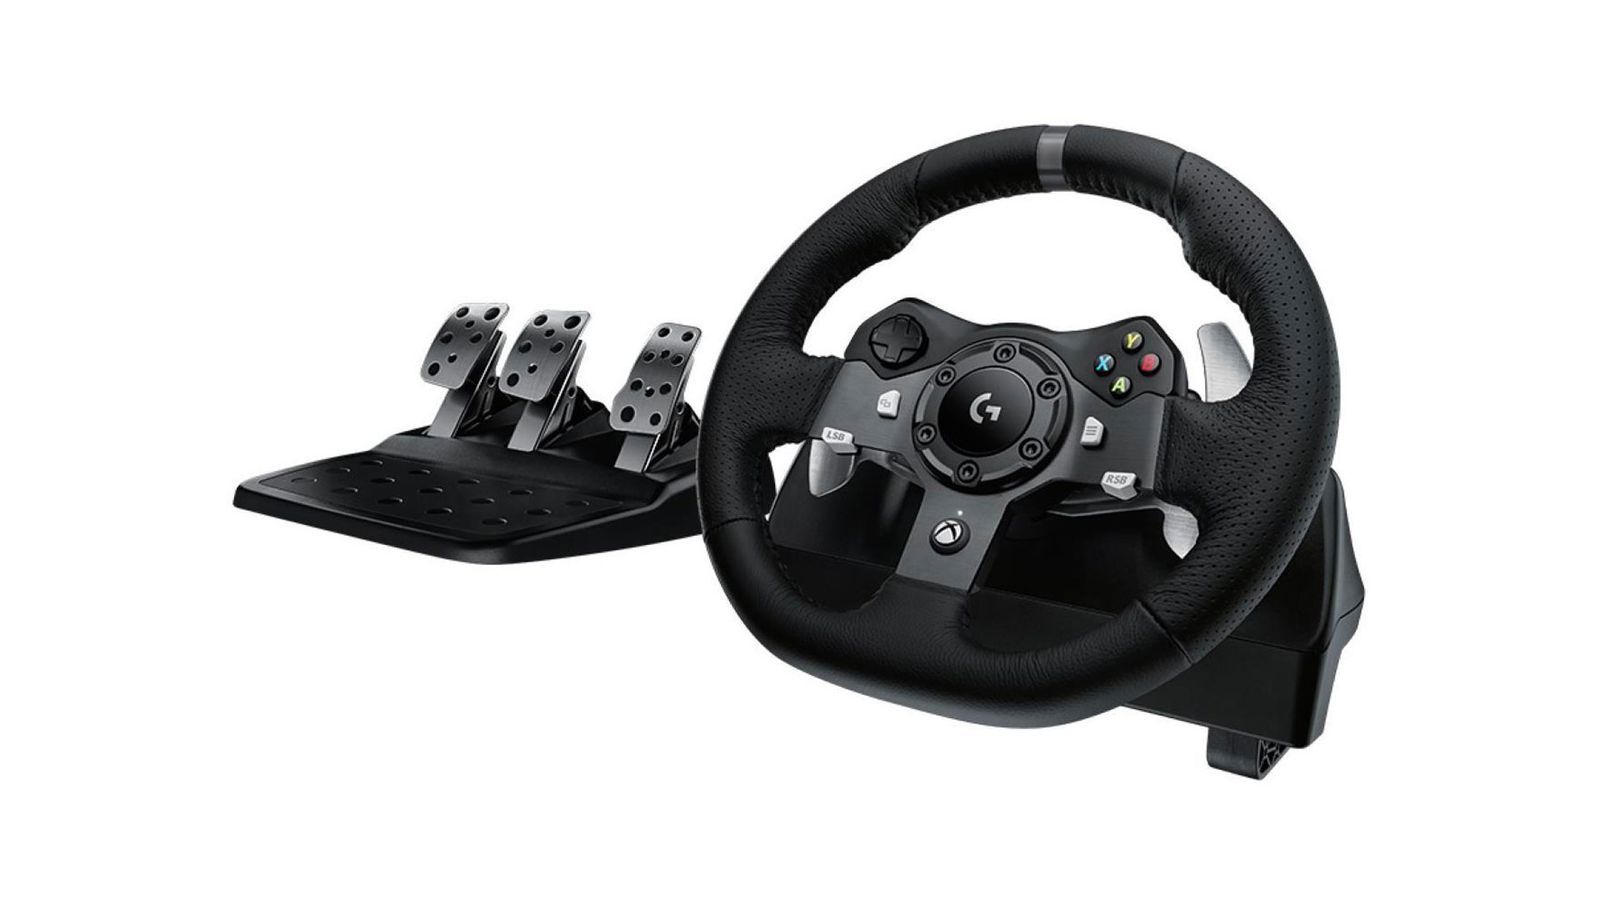 Logitech G920 product image of a black racing wheel with silver paddles on the back, and a set of black and dark grey pedals next to it.